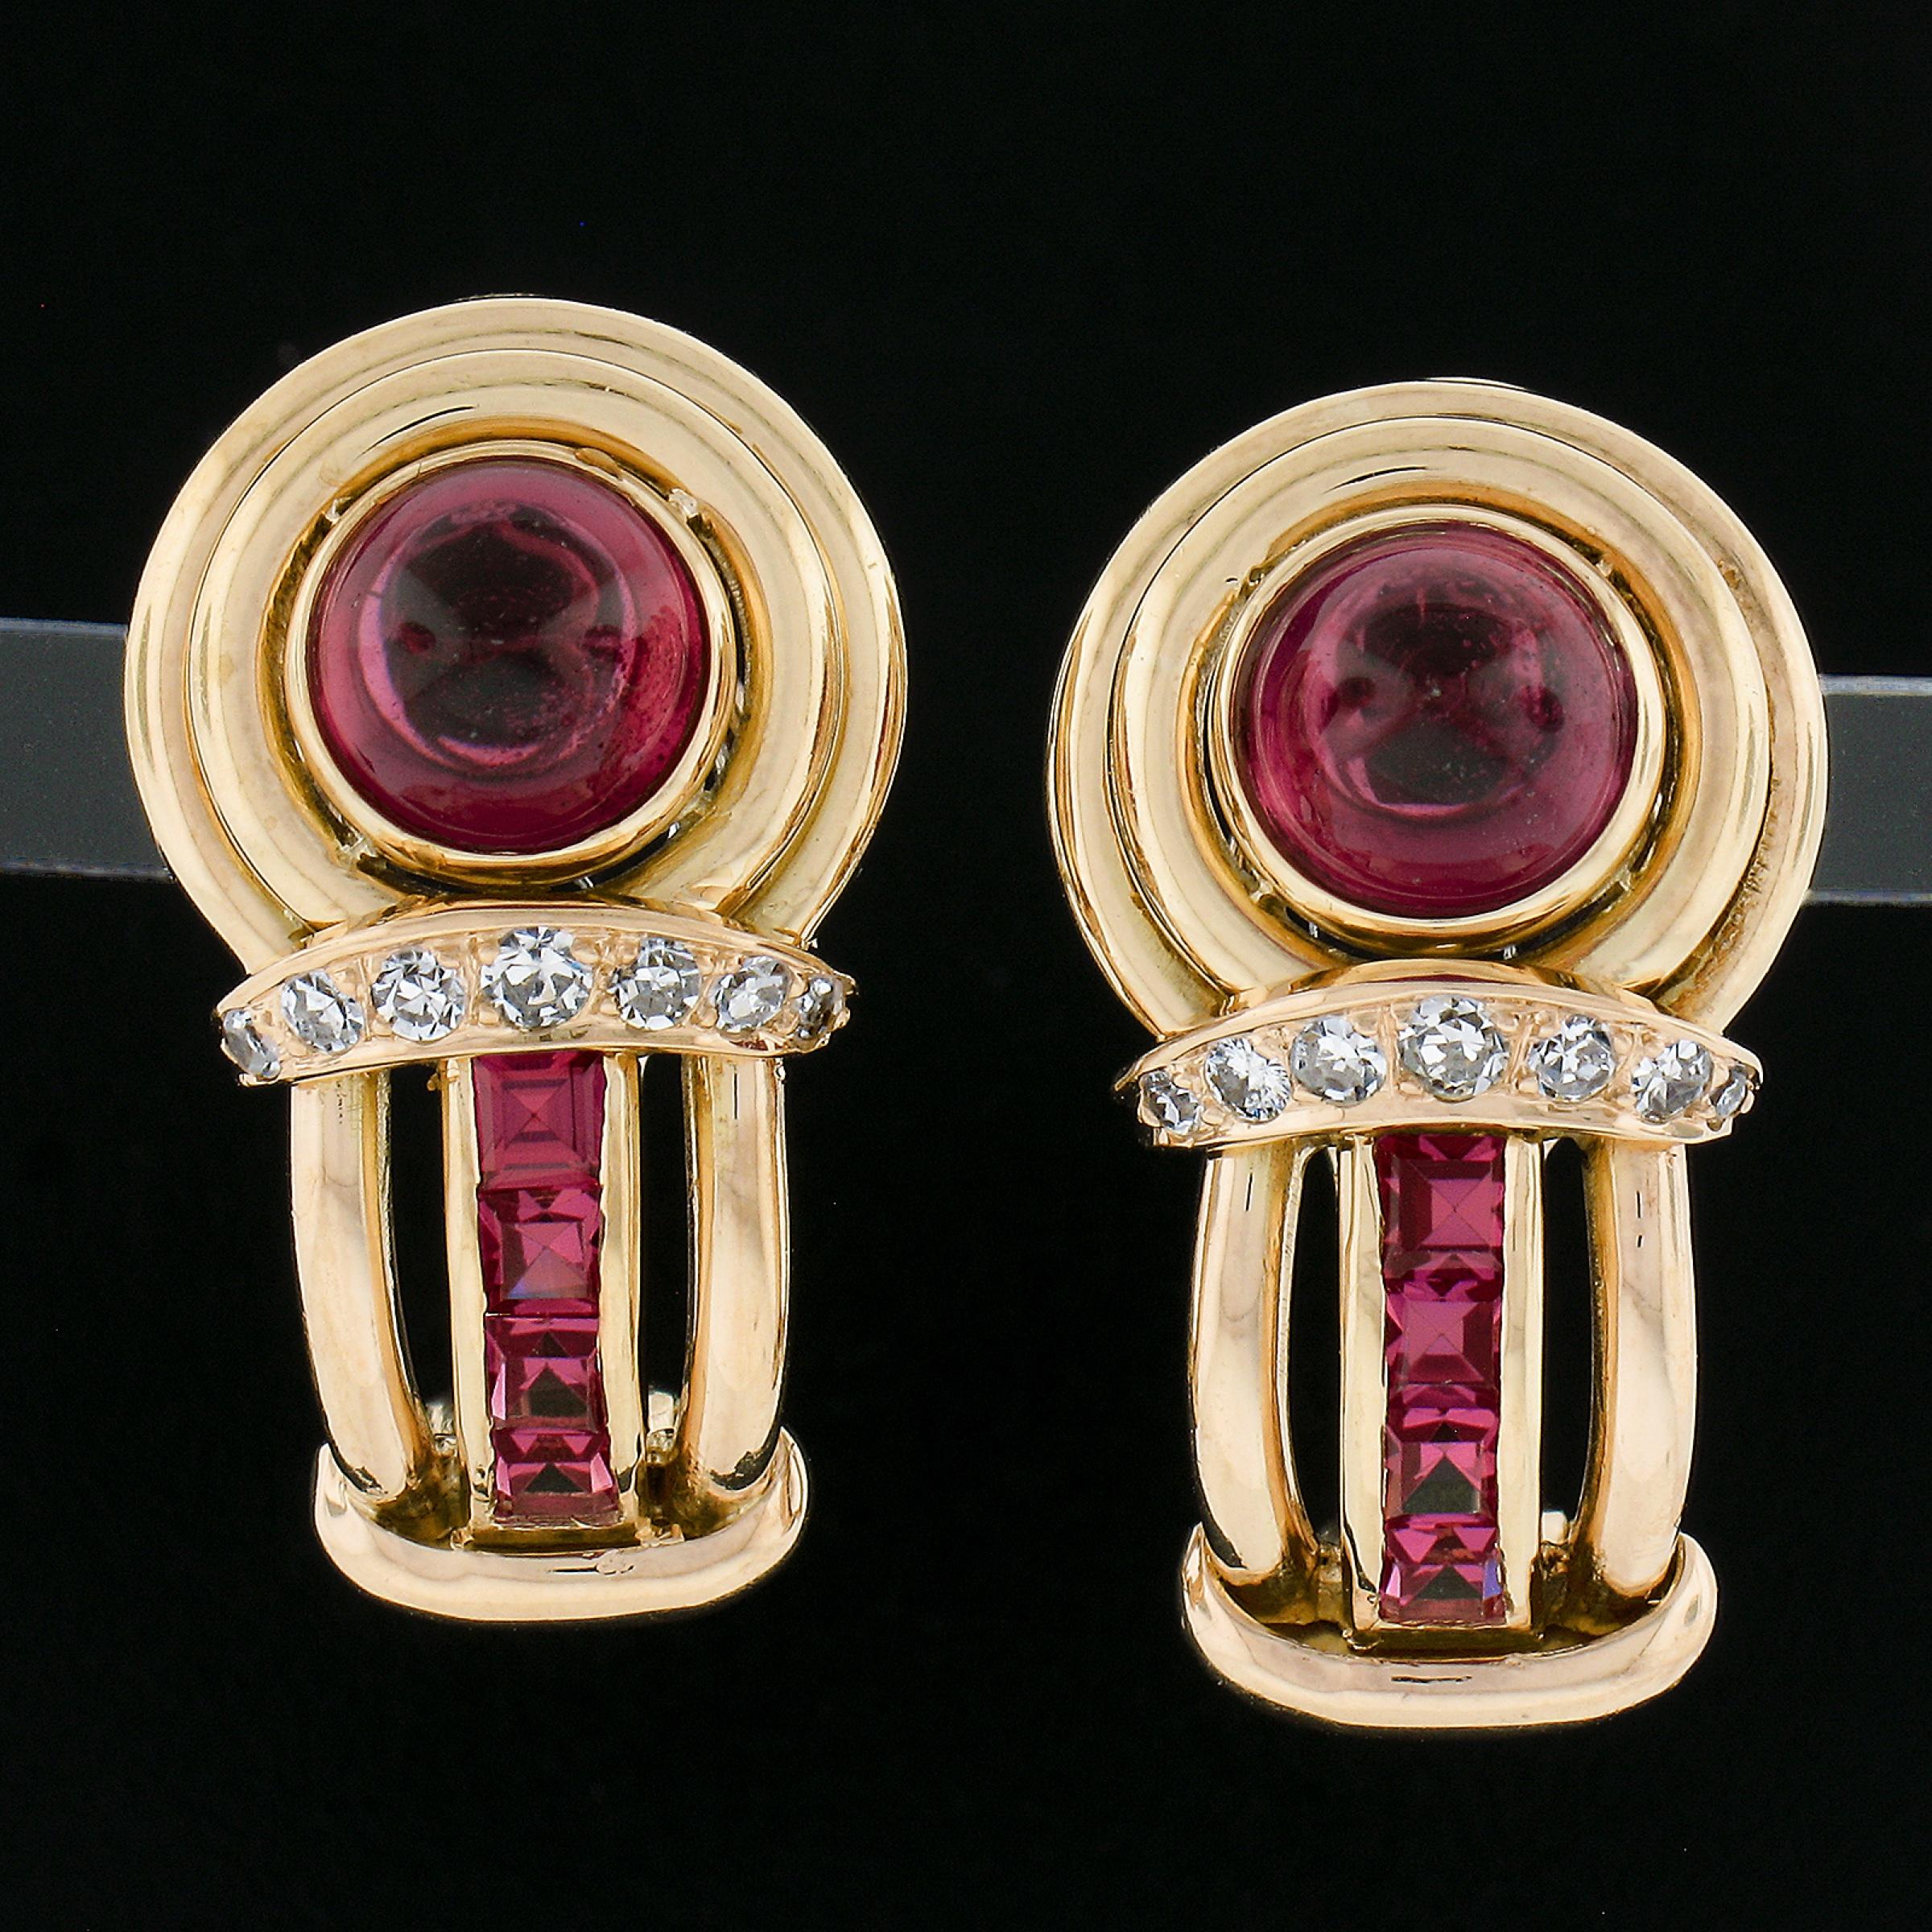 --Stone(s):--
(2) Synthetic Rubies - Round Cabochon Cut - Bezel Set - Vivid Red Color - 6.9mm (approx.)
(8) Synthetic Rubies - Square Step Cut - Channel Set - Vivid Pinkish Red Color 
(14) Natural Genuine Diamonds - Old Single Cut - Pave Set - G-I